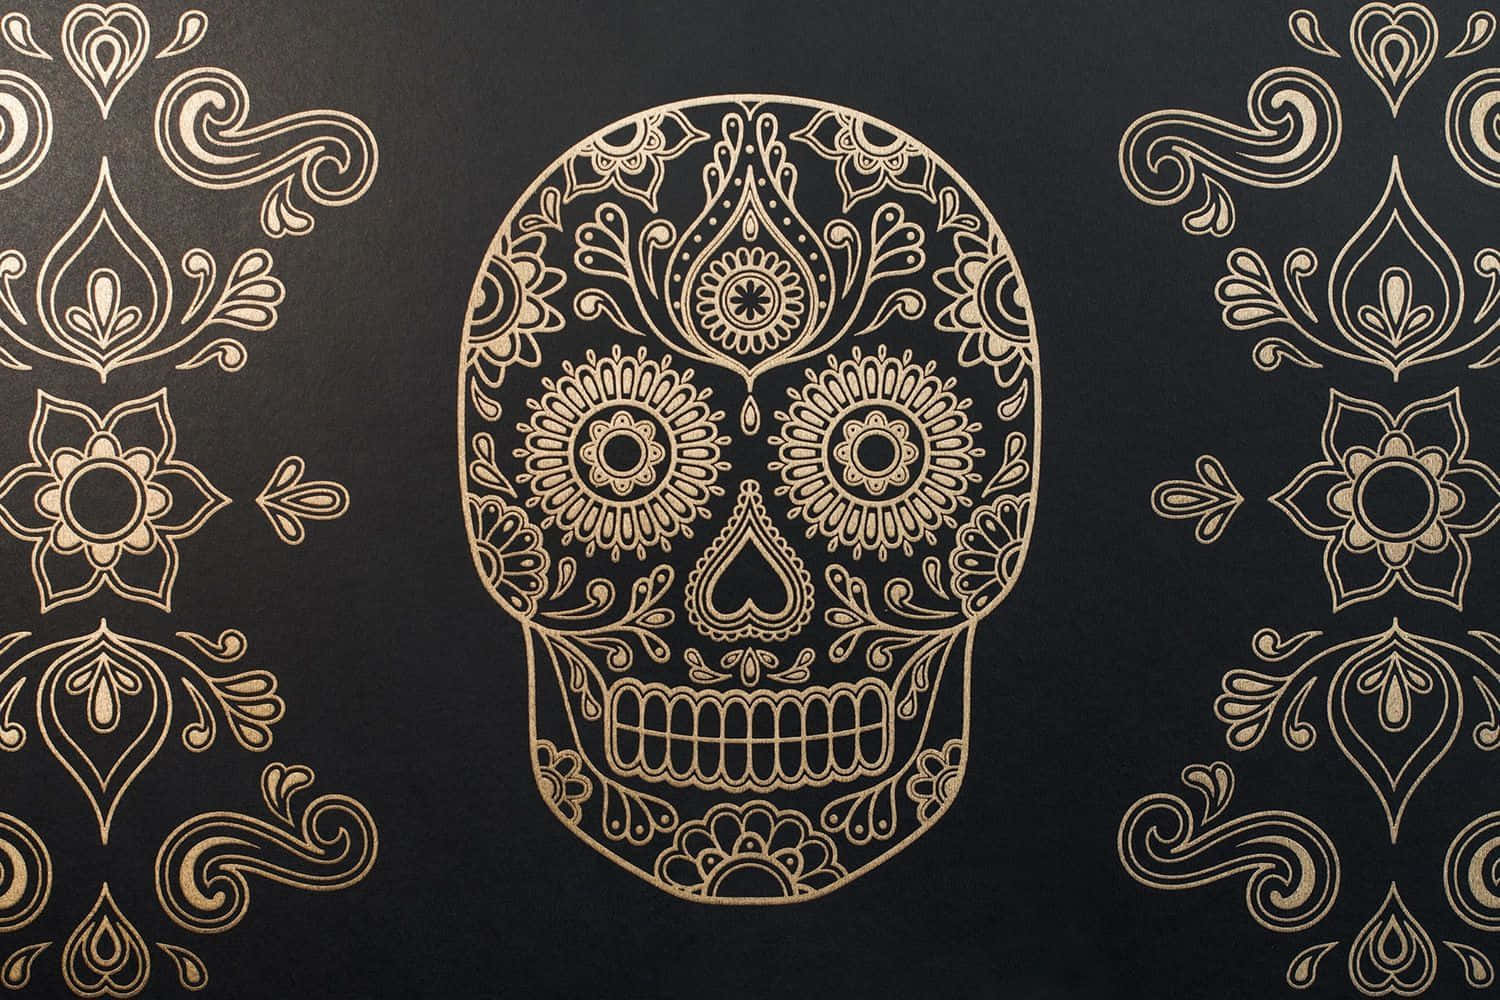 Be the king or queen of cool with the Sugar Skull Phone. Wallpaper